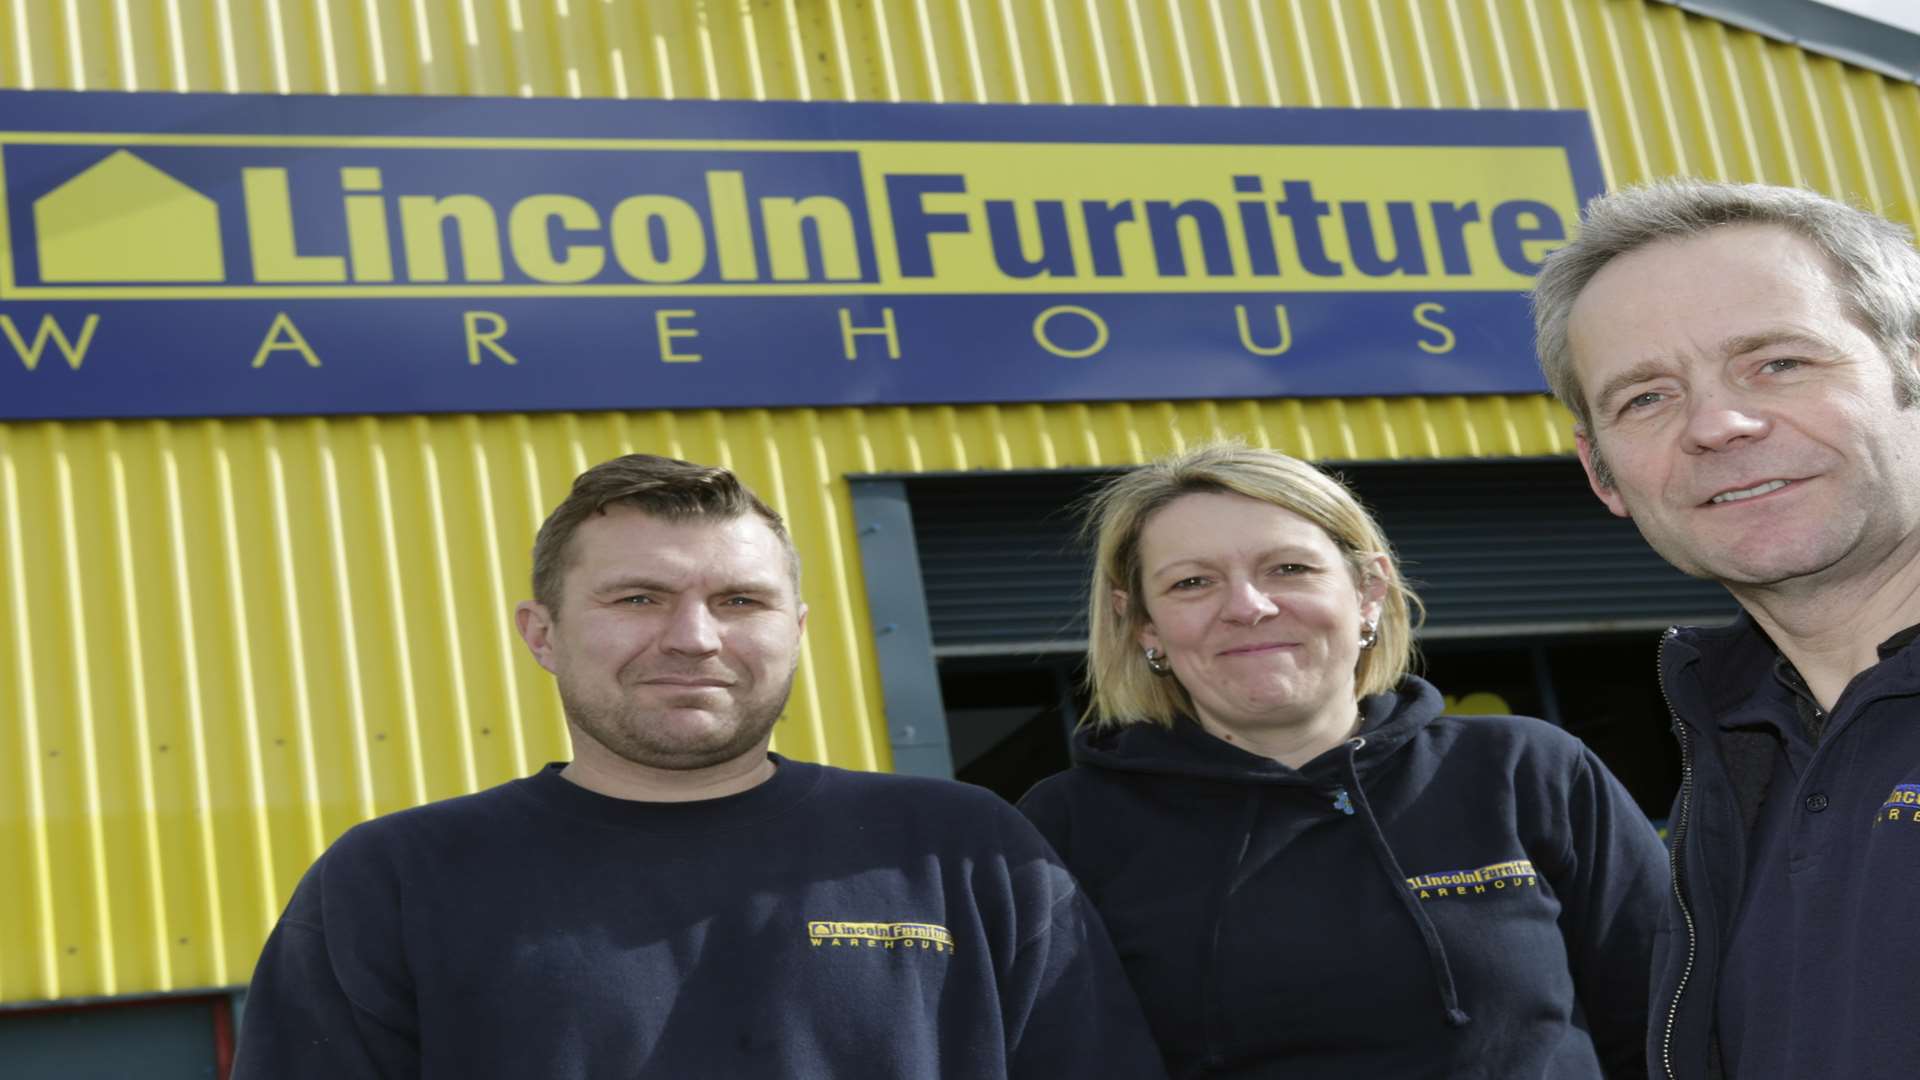 From left to Right: James Butler, Jo Downie, Steve Swan. Some of the management team at Lincoln Furniture Warehouse. Picture: Martin Apps